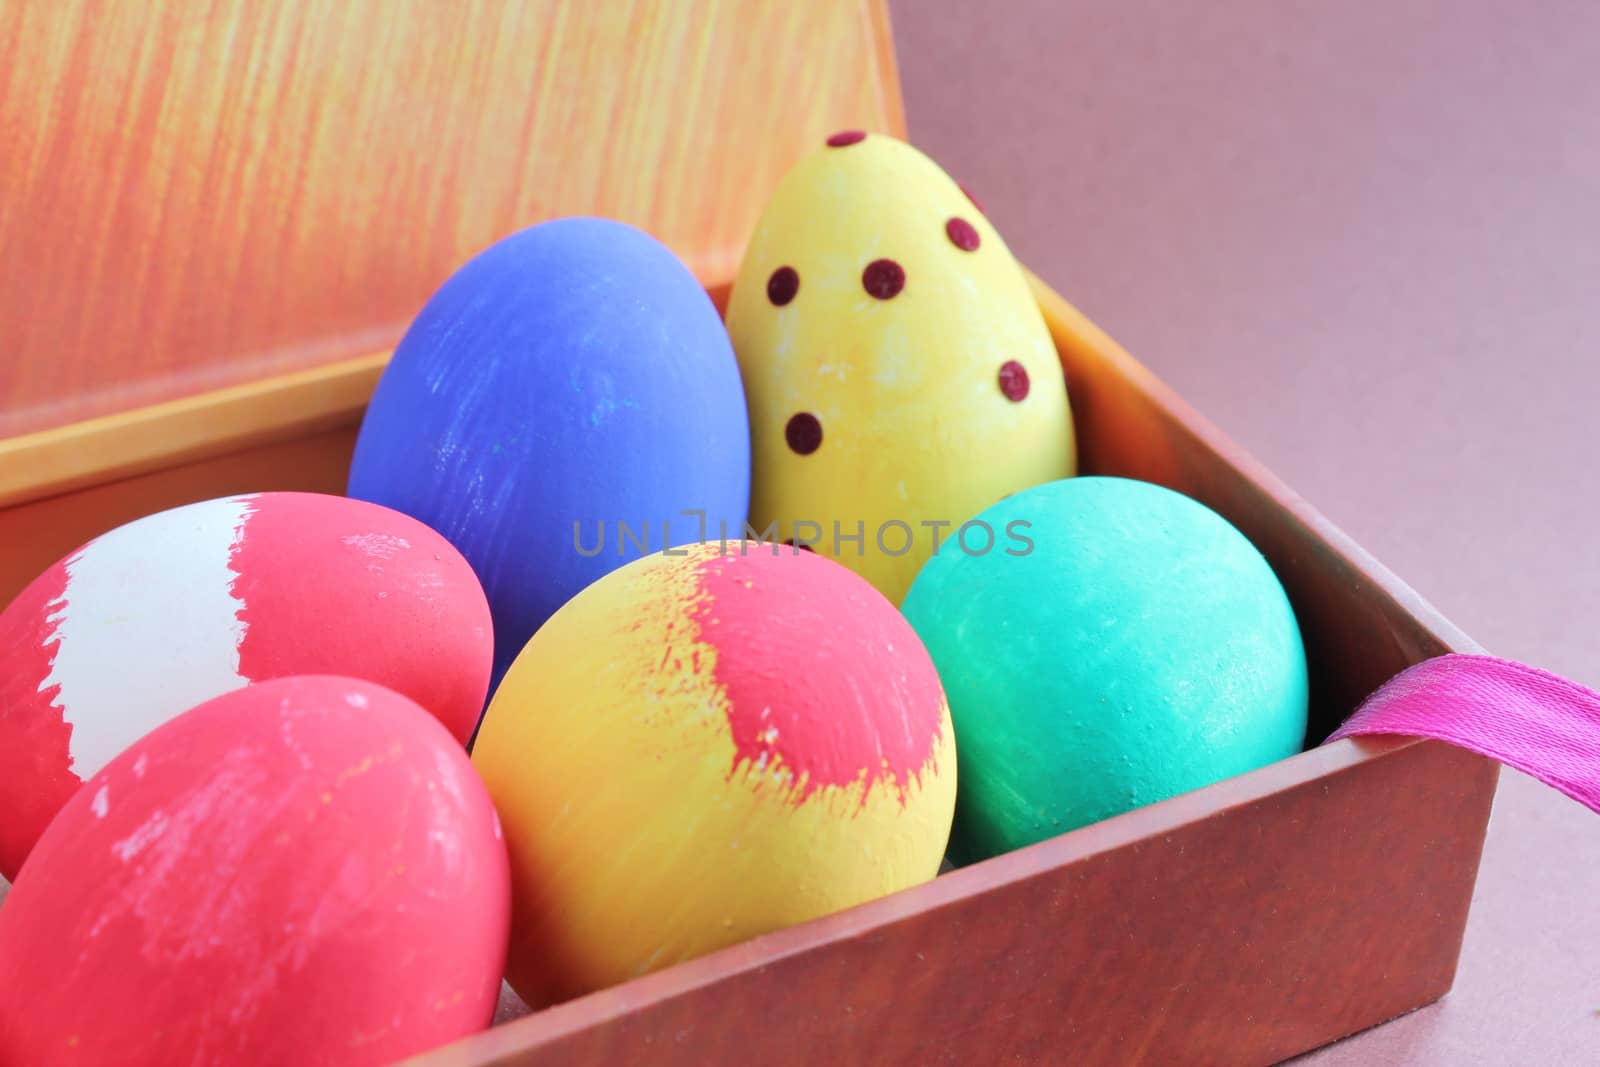 Colorful painted Easter eggs on a gift box.
